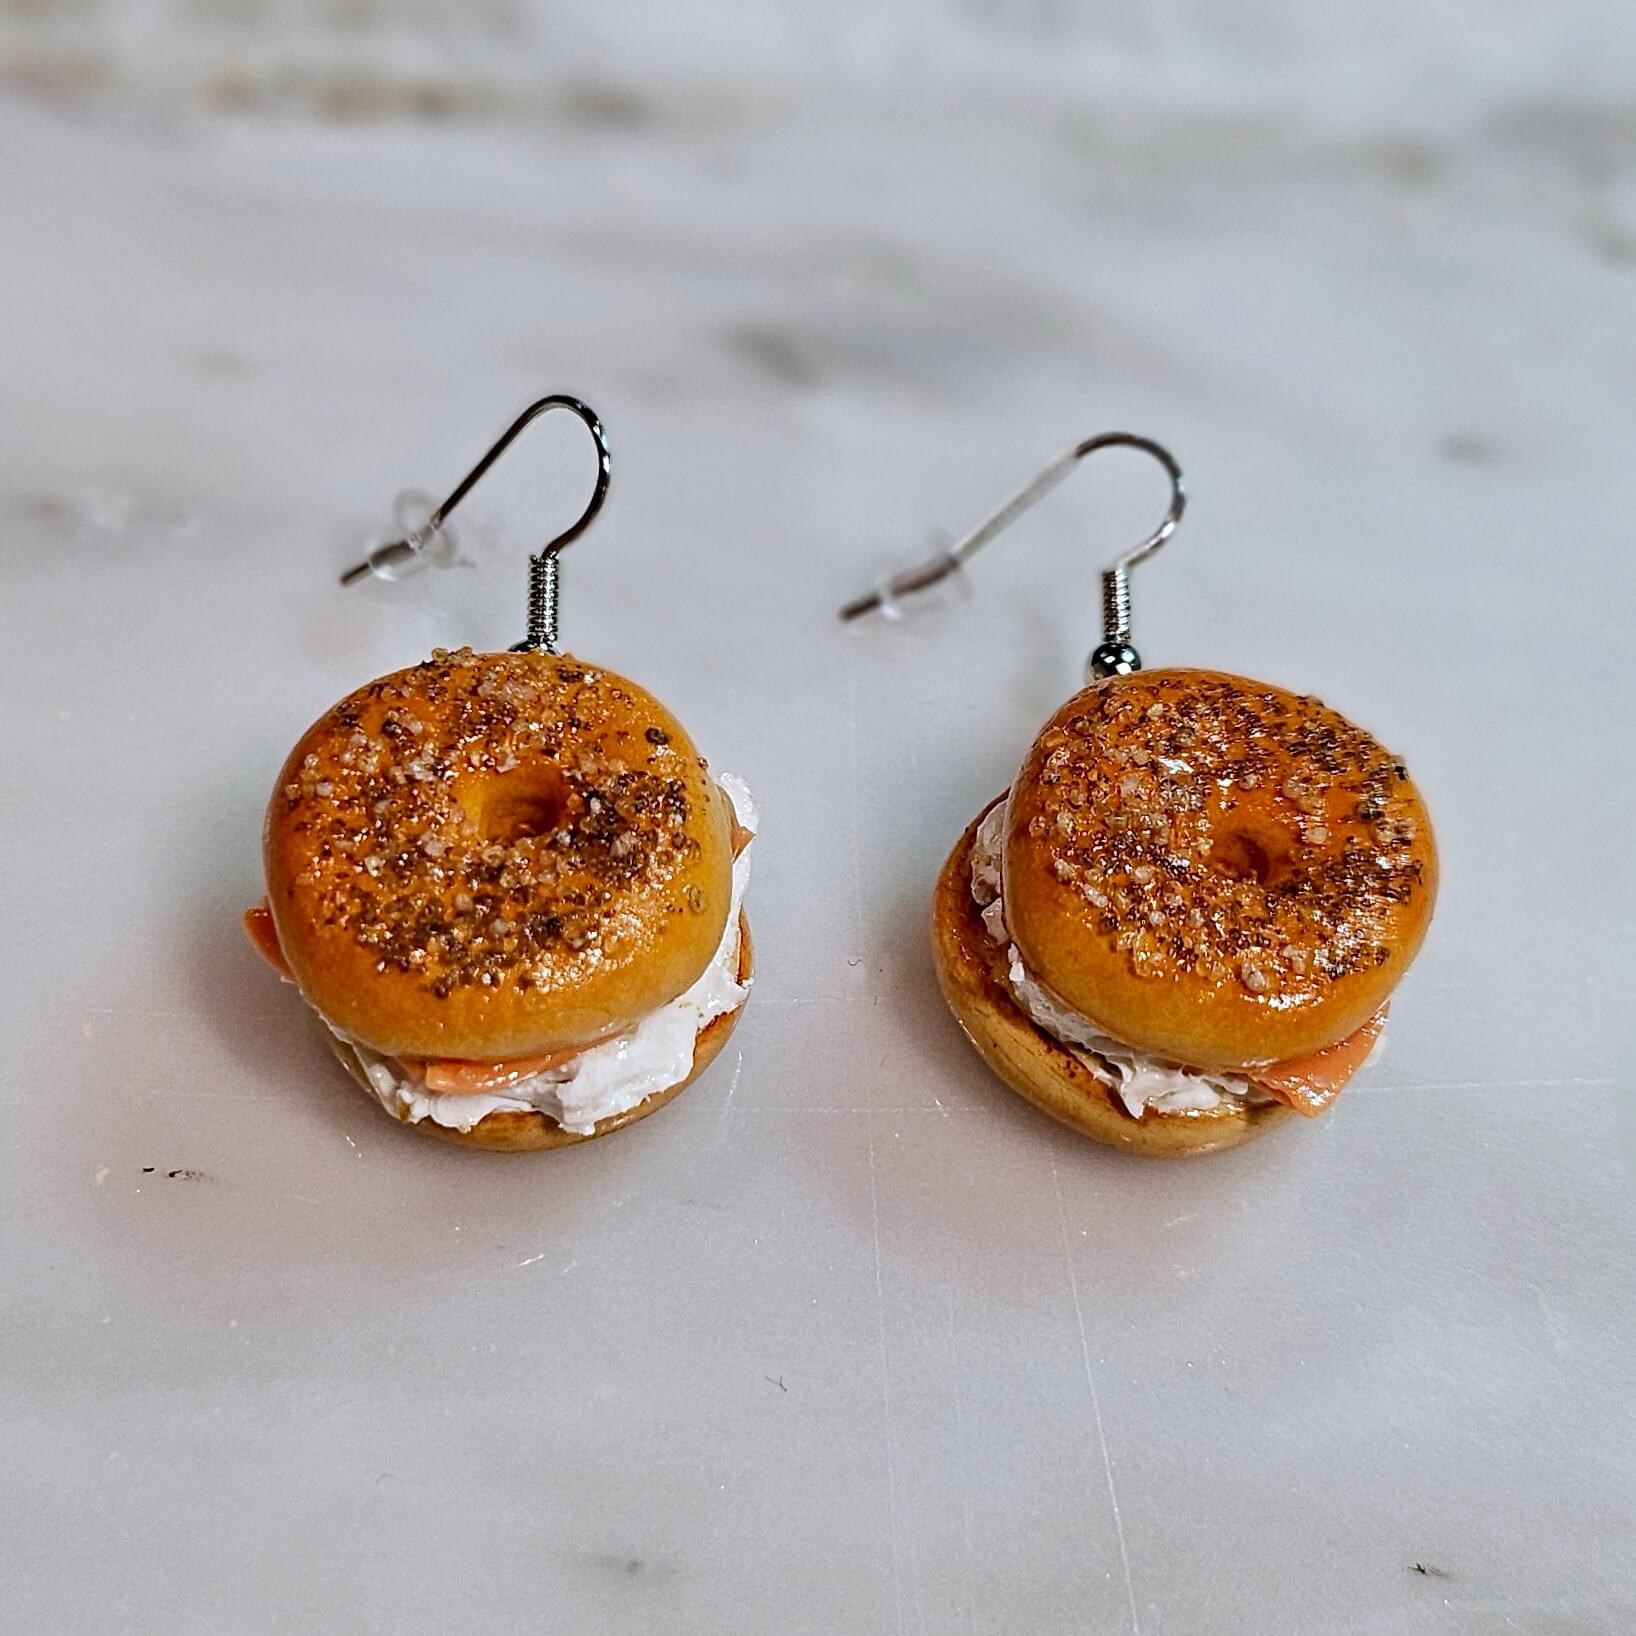 Marshmallow Twists Earrings Bagel with Lox and Cream Cheese Earrings